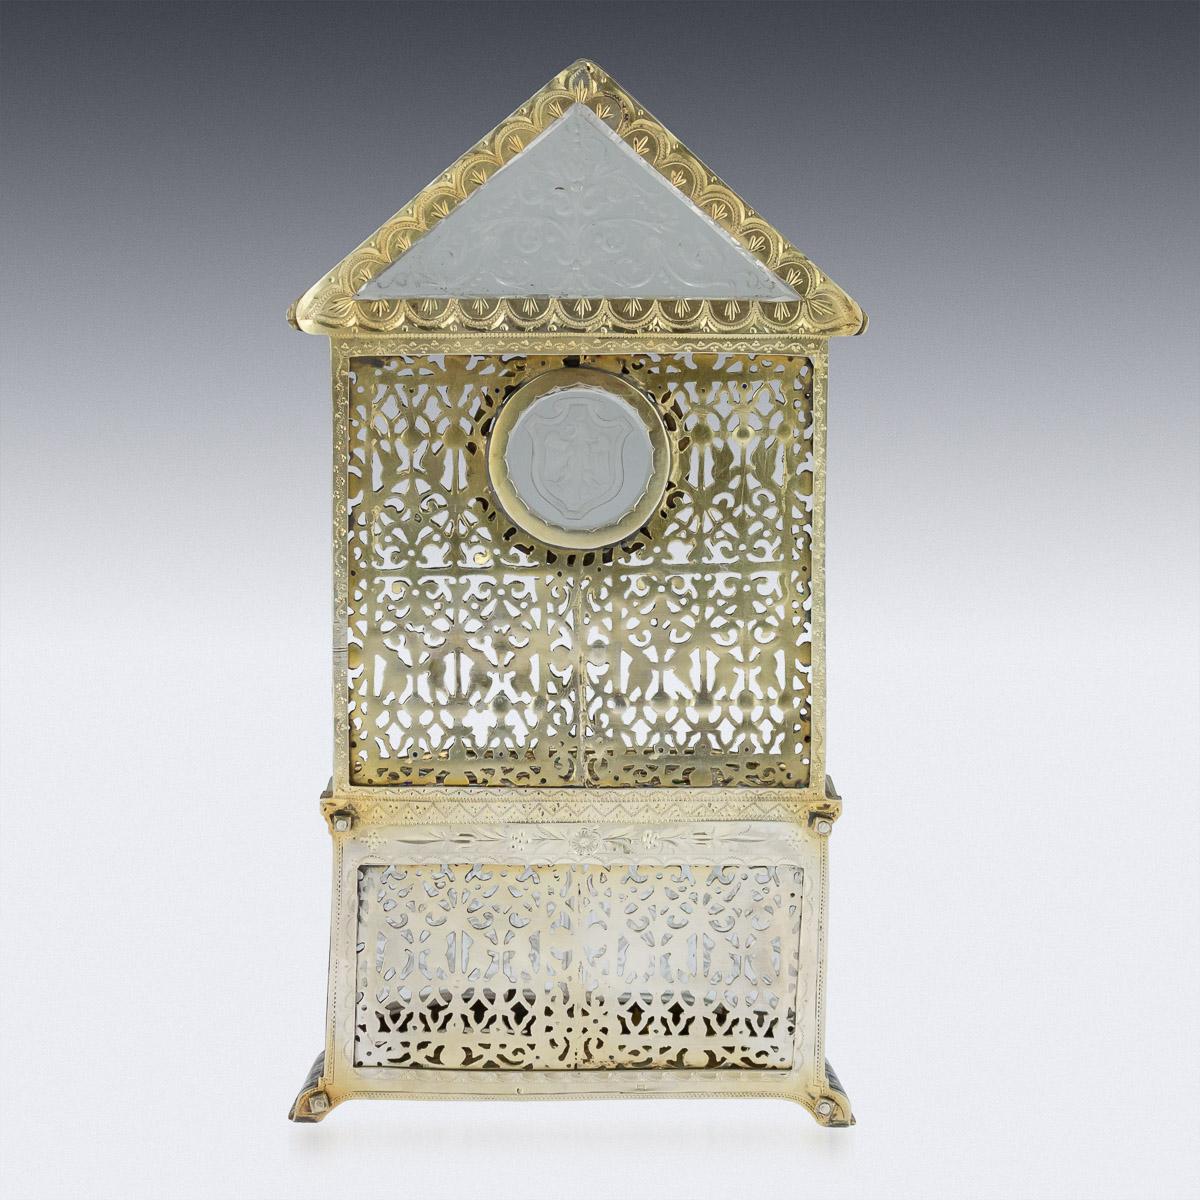 Austrian Solid Silver-Gilt and Enamel Reliquary by Rudolf Linke, circa 1890 For Sale 1